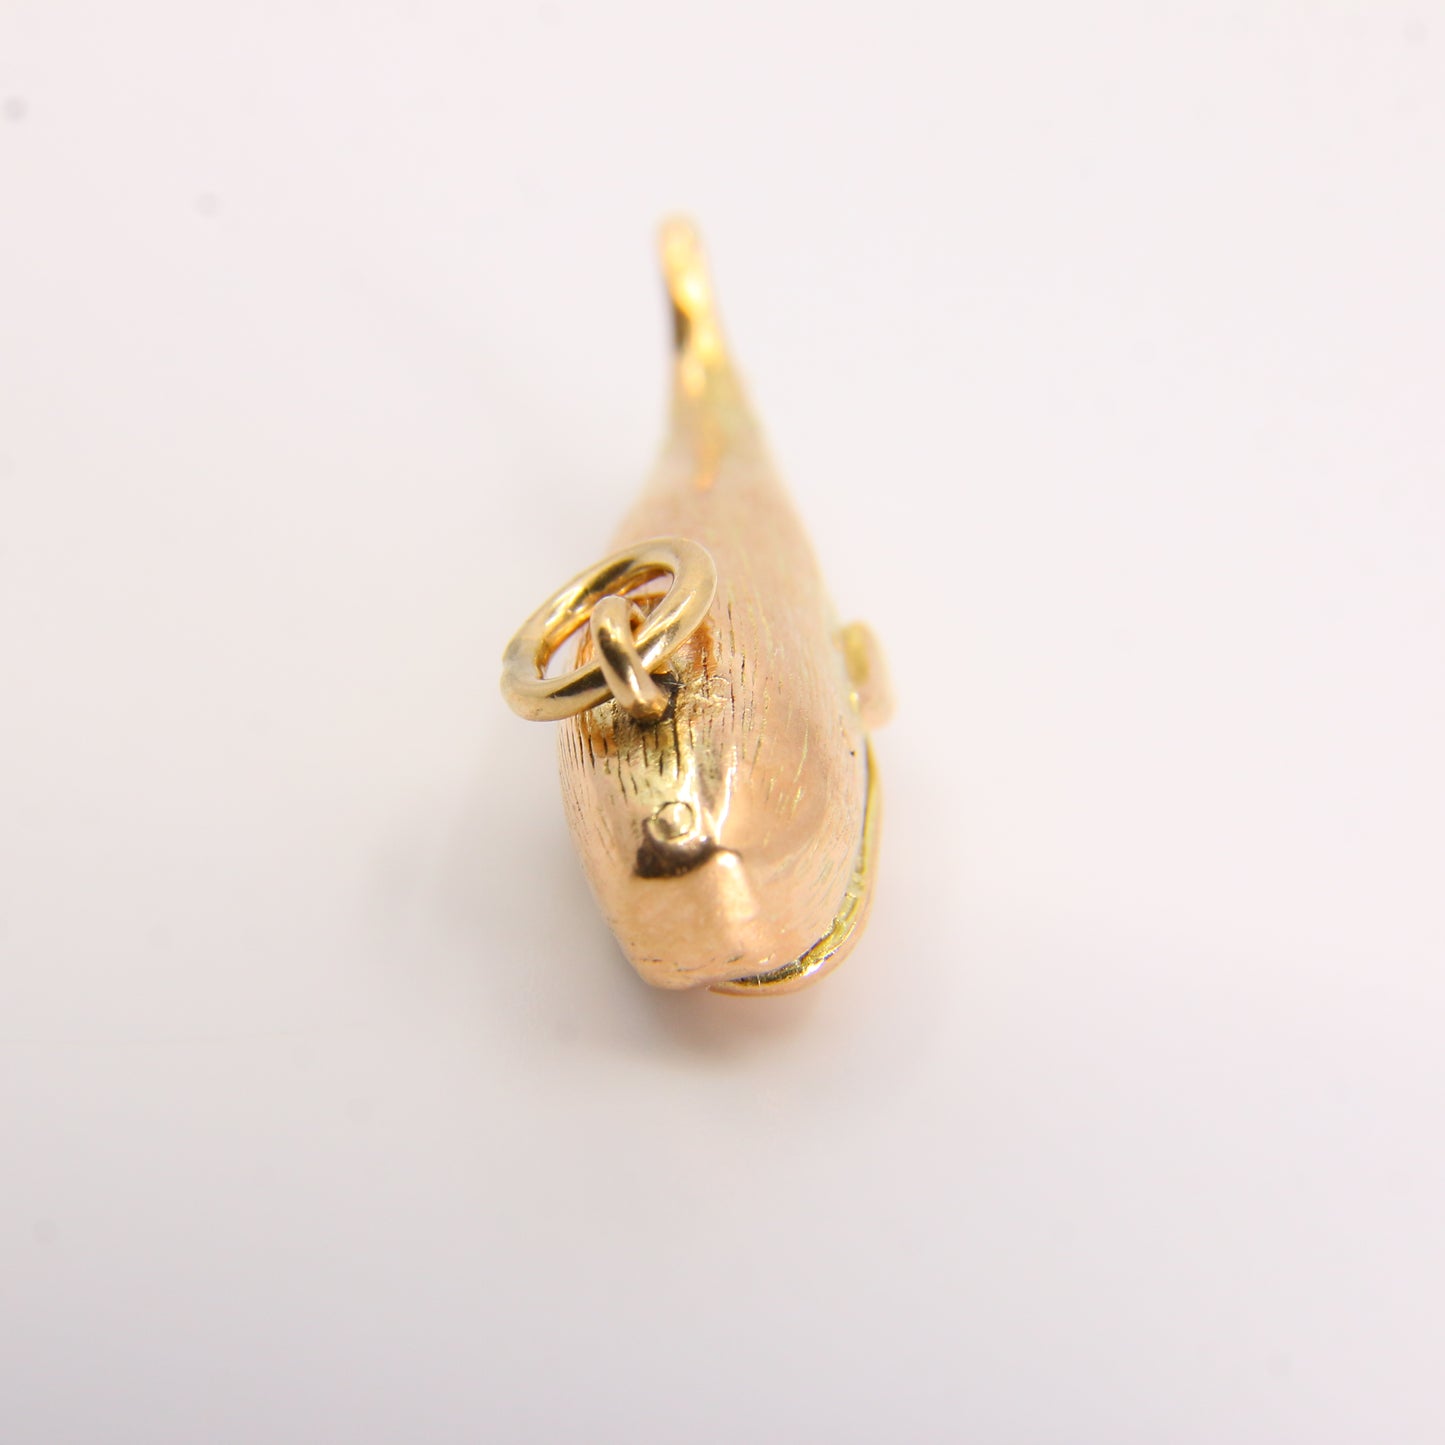 Vintage Whale Charm, Movable Pendant Jonah and the Whale Yellow Gold Charm